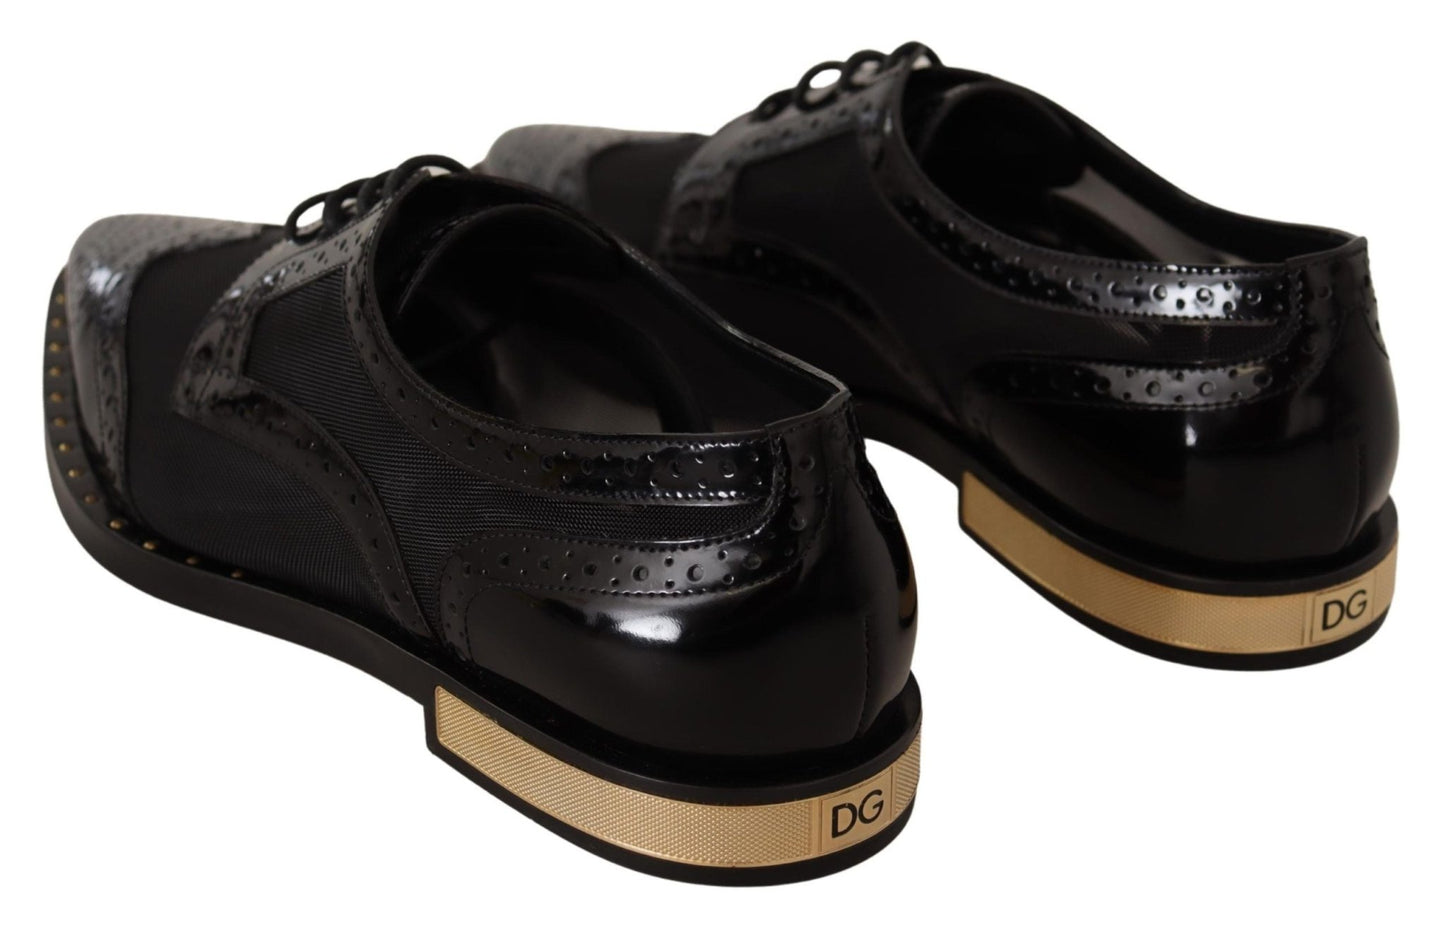 Dolce & Gabbana Black Leather Broques Sheer Wingtip Shoes